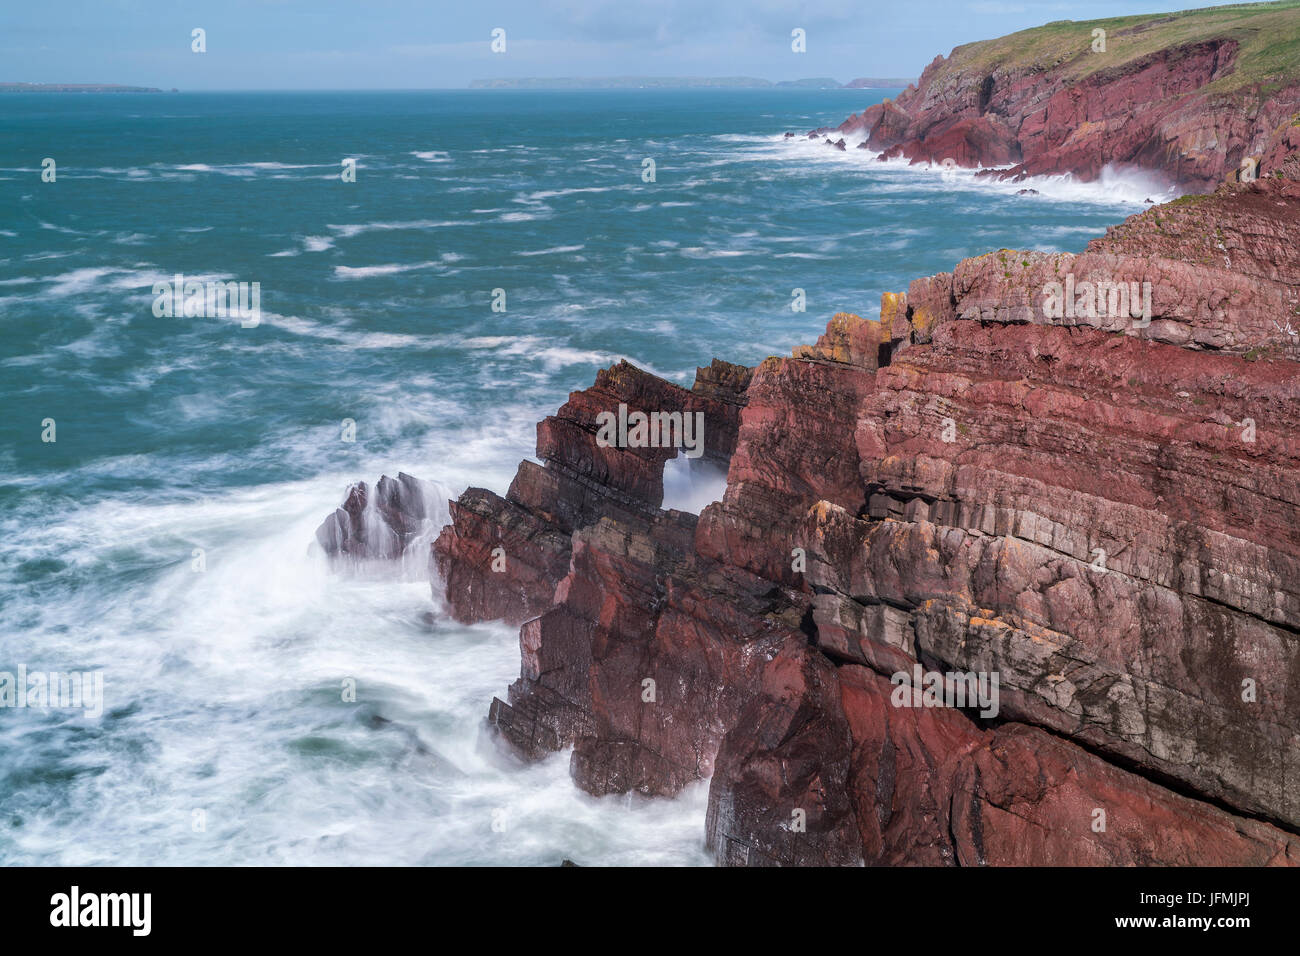 St. Ann's Head at the entrance to the Milford Haven waterway, Dale, Pembrokeshire National Park, Wales, United KIngdom, Europe. Stock Photo